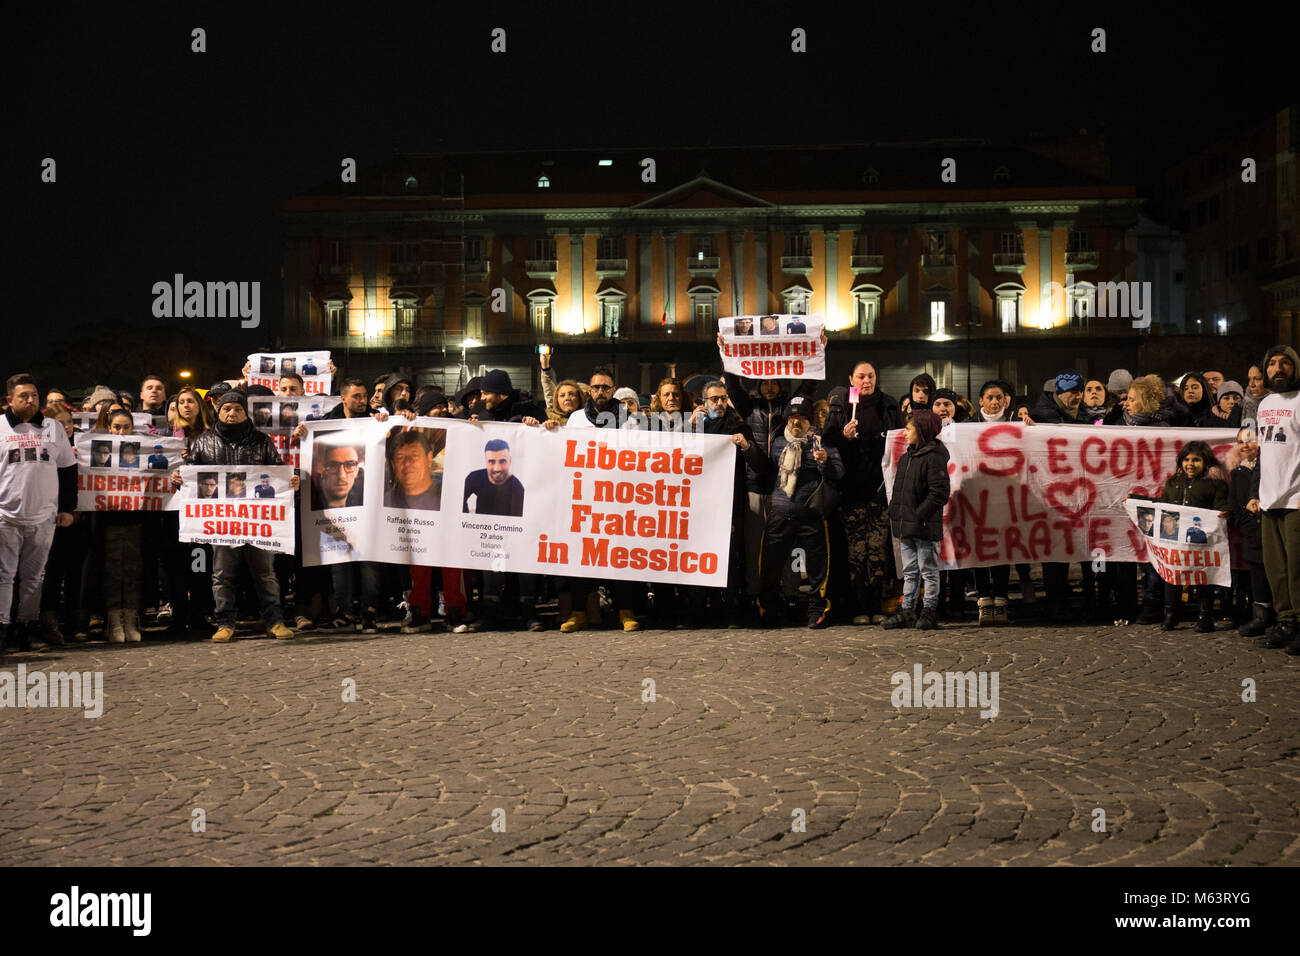 Naples, Campania, Italy. 28th Feb, 2018. Demonstrator seen with banners during the rally.Rally organized by the family of the three Neapolitan men kidnapped in TecalitlÃ n in Mexico, they demand their immediate release. Credit: EVicinanza Desaparecidos 2 .jpg/SOPA Images/ZUMA Wire/Alamy Live News Stock Photo